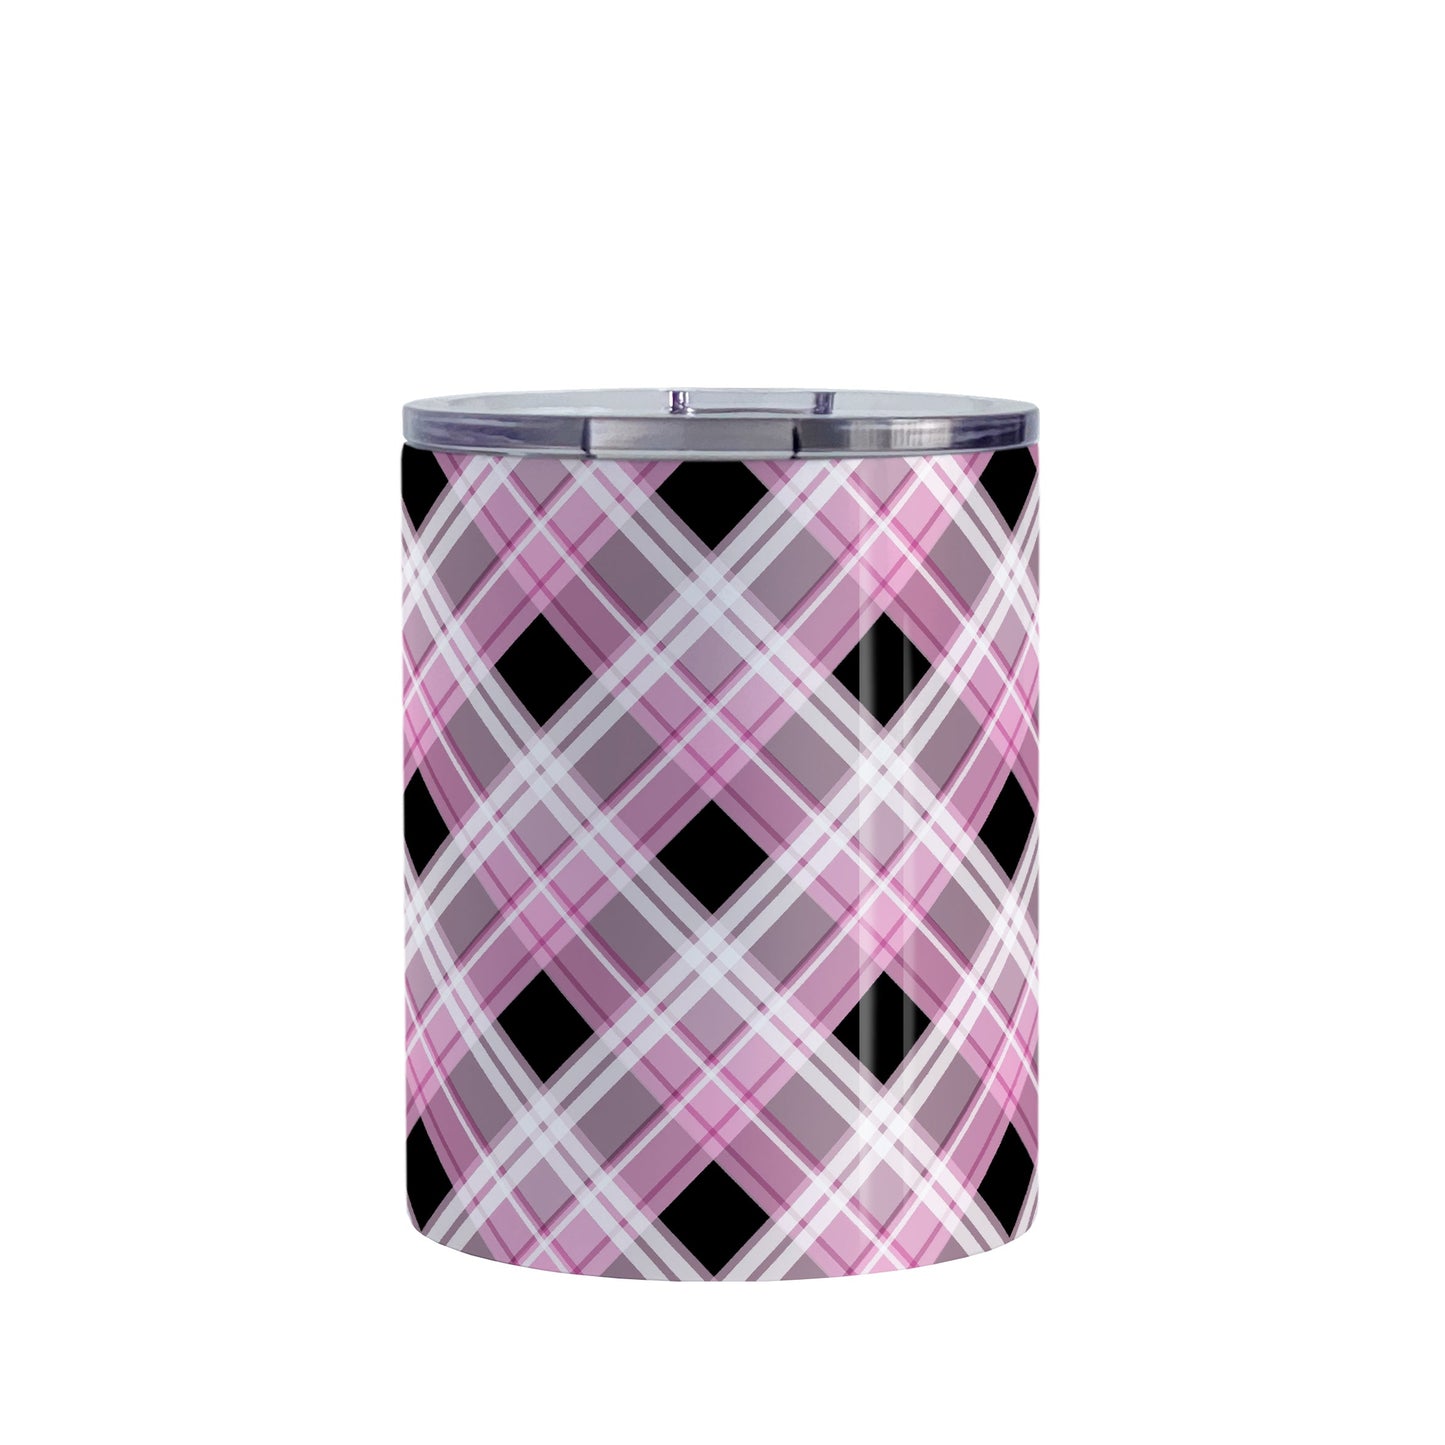 Alternative Black and Pink Plaid Tumbler Cup (10oz) at Amy's Coffee Mugs. A stainless steel insulated tumbler cup designed with a diagonal pink, black, and white plaid pattern that wraps around the cup. A tumbler cup designed for someone who loves plaid patterns and the colors pink and black together.